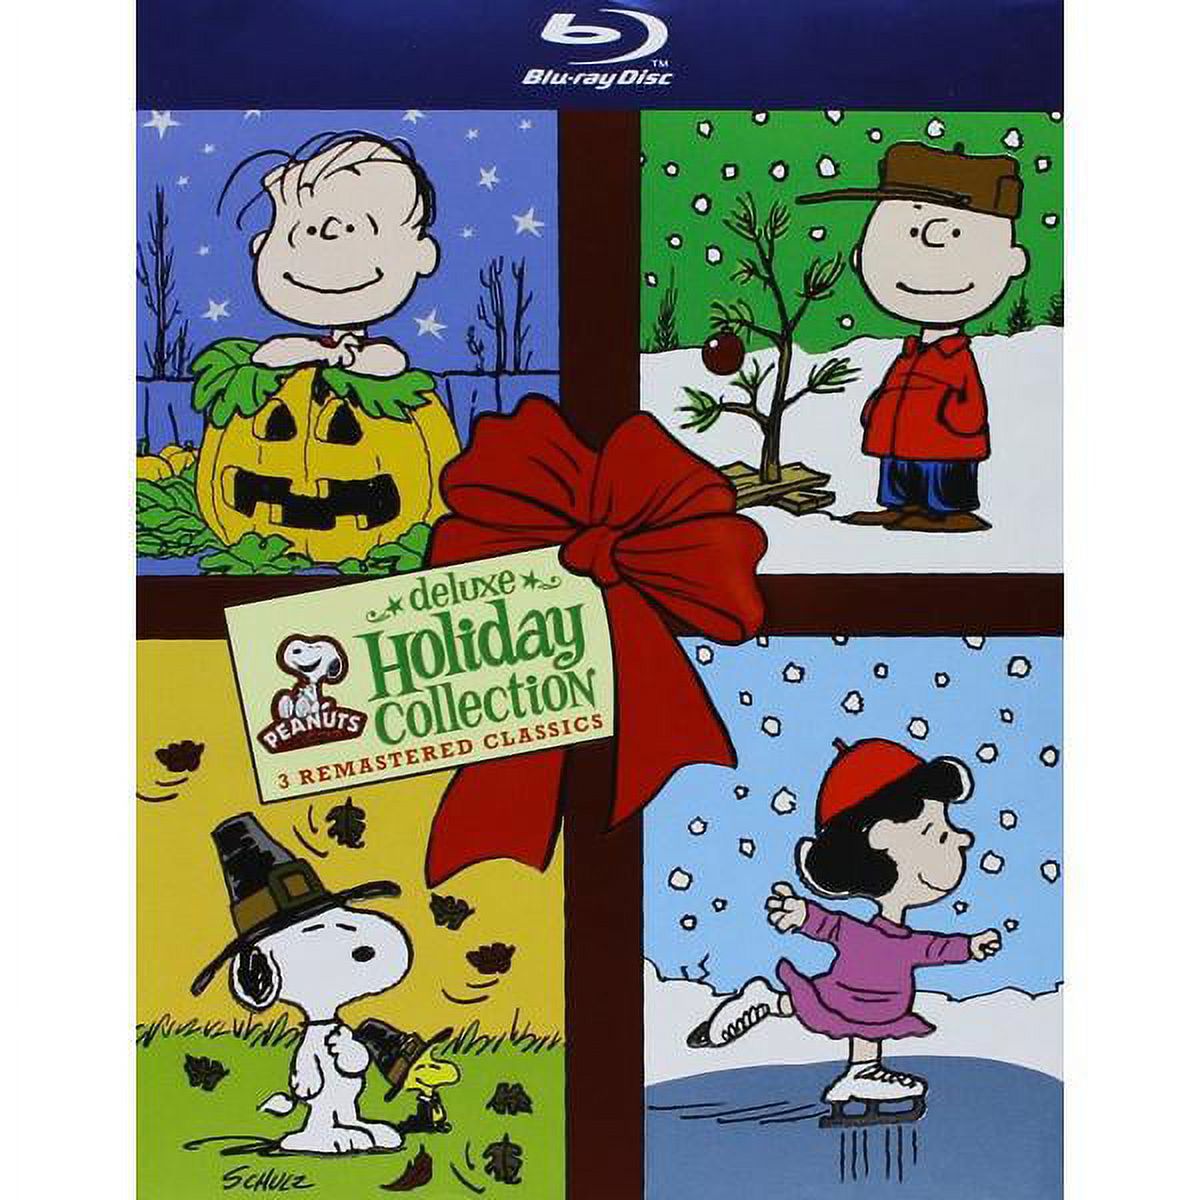 Peanuts Deluxe Holiday Collection [Blu-Ray Box Set] - image 1 of 5